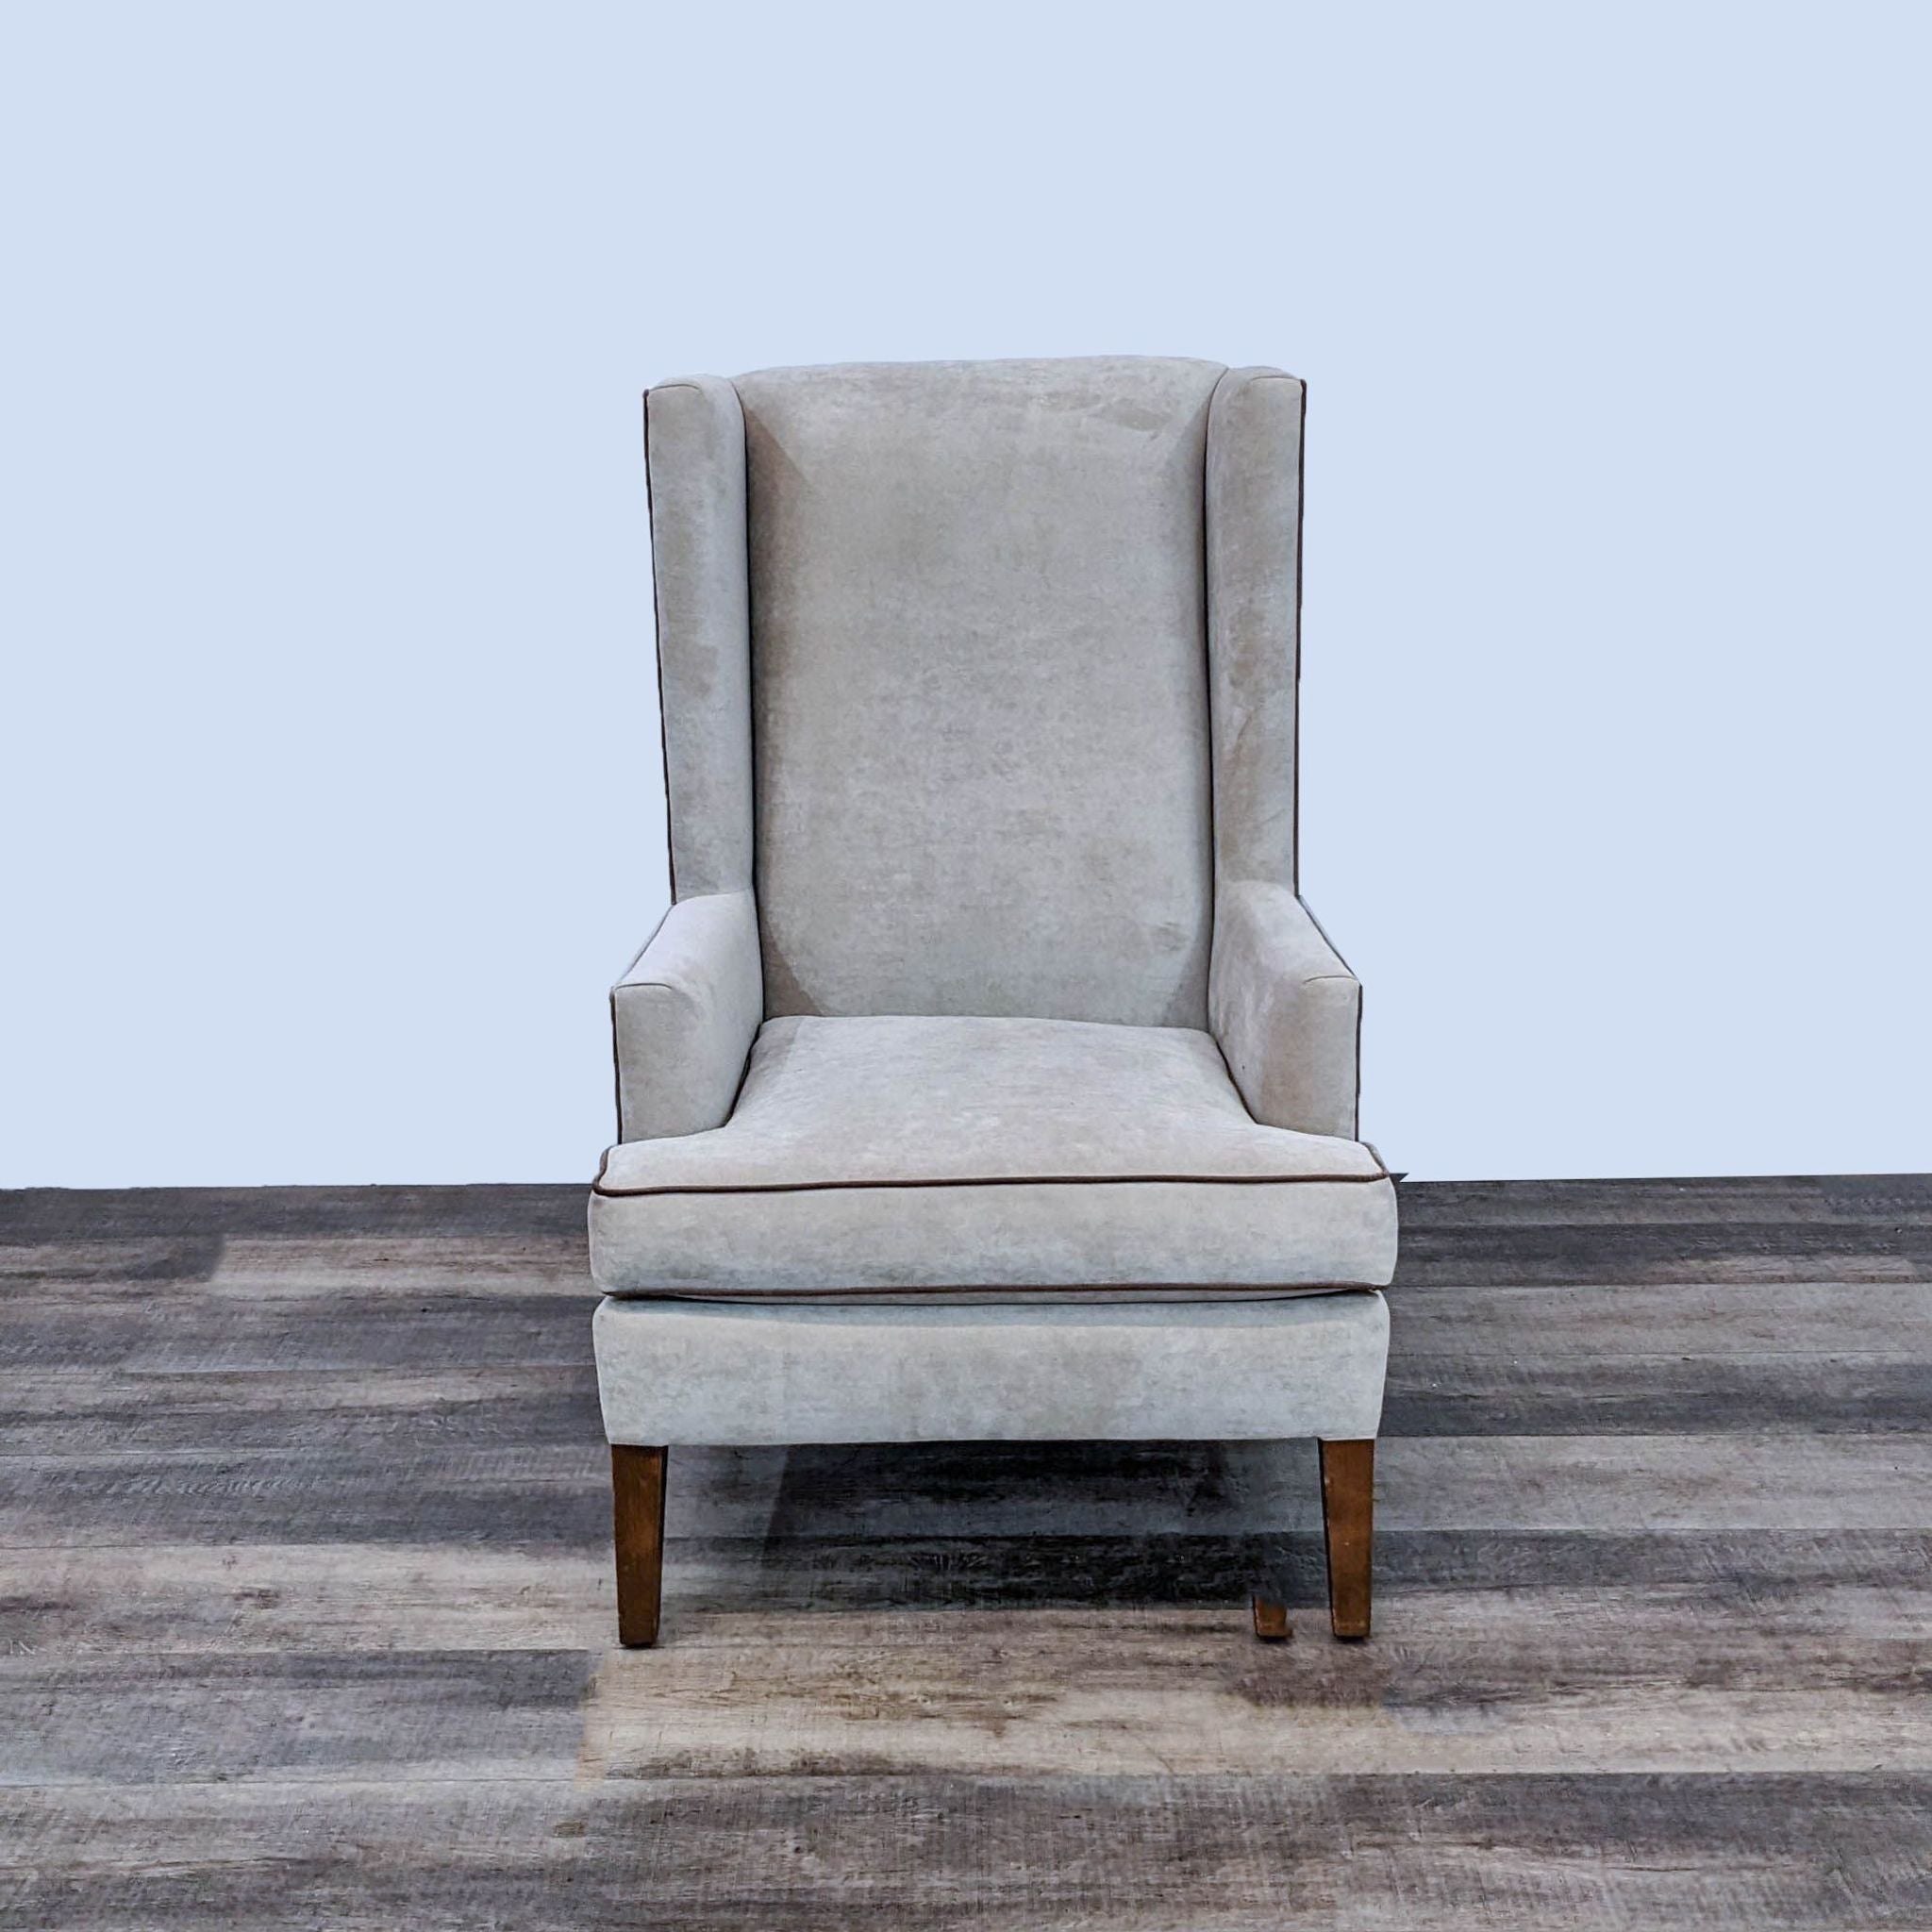 Reperch contemporary wingback chair in a front view, with soft upholstery, contrasting trim, and tapered legs.